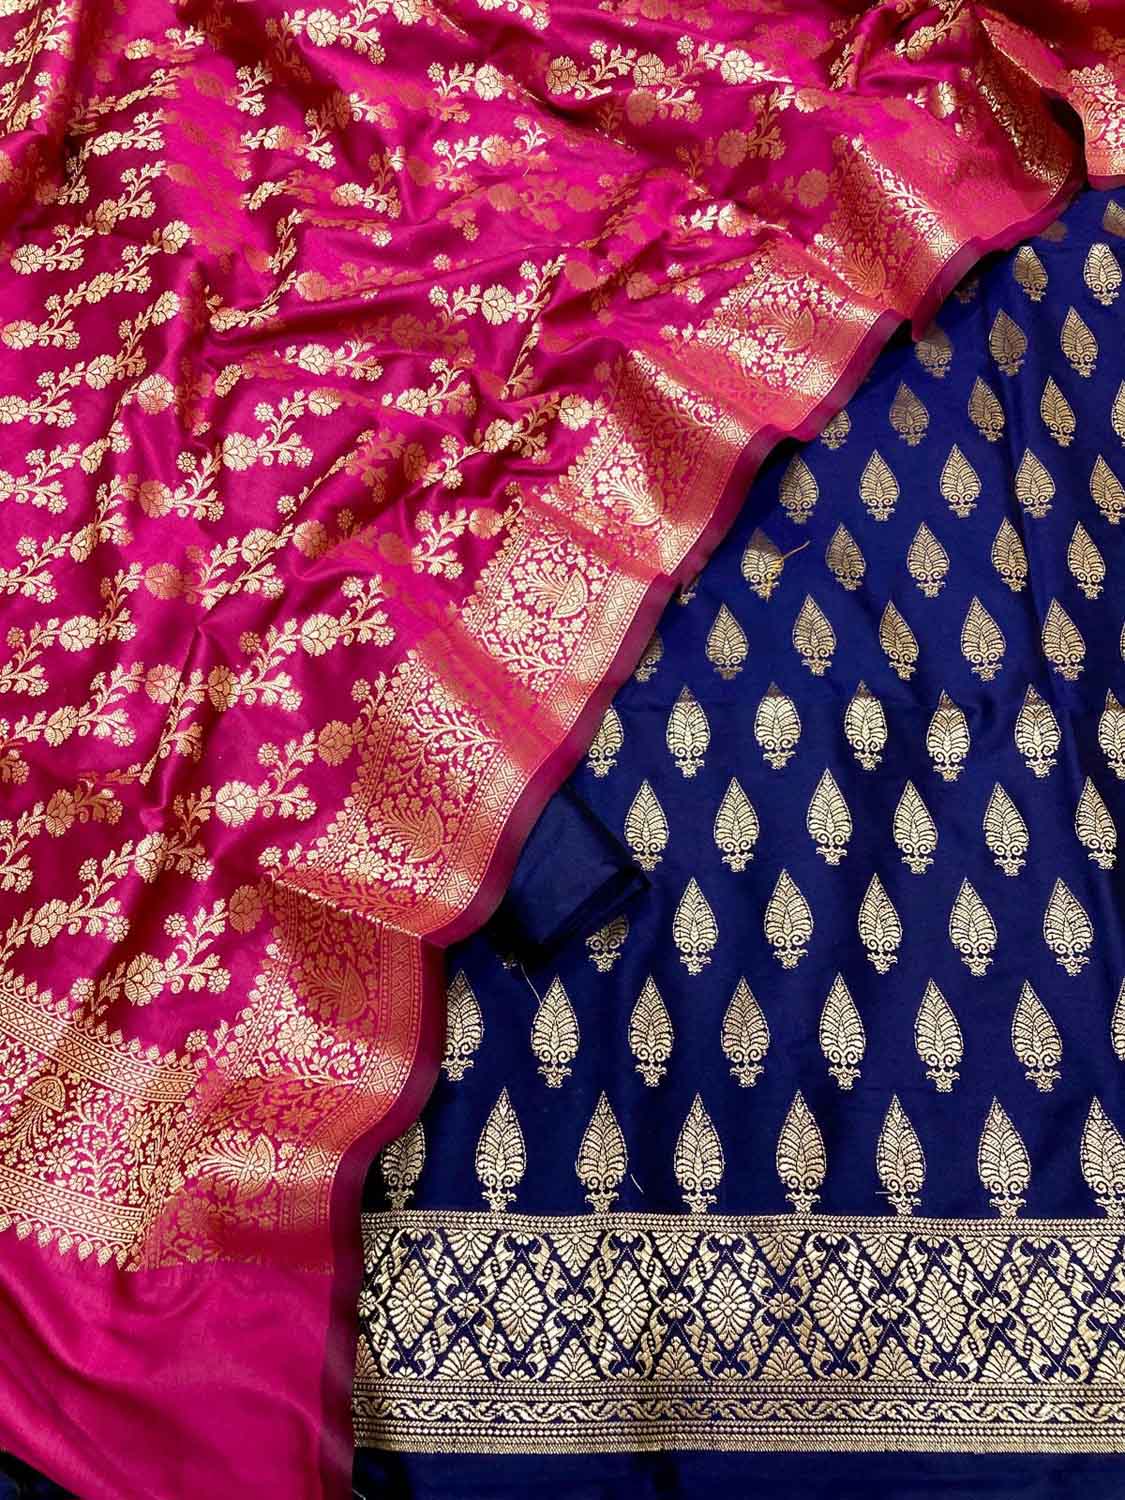 Stunning Blue and Pink Banarasi Silk Three Piece Unstitched Suit Set : A Perfect Blend of Elegance and Style - Luxurion World